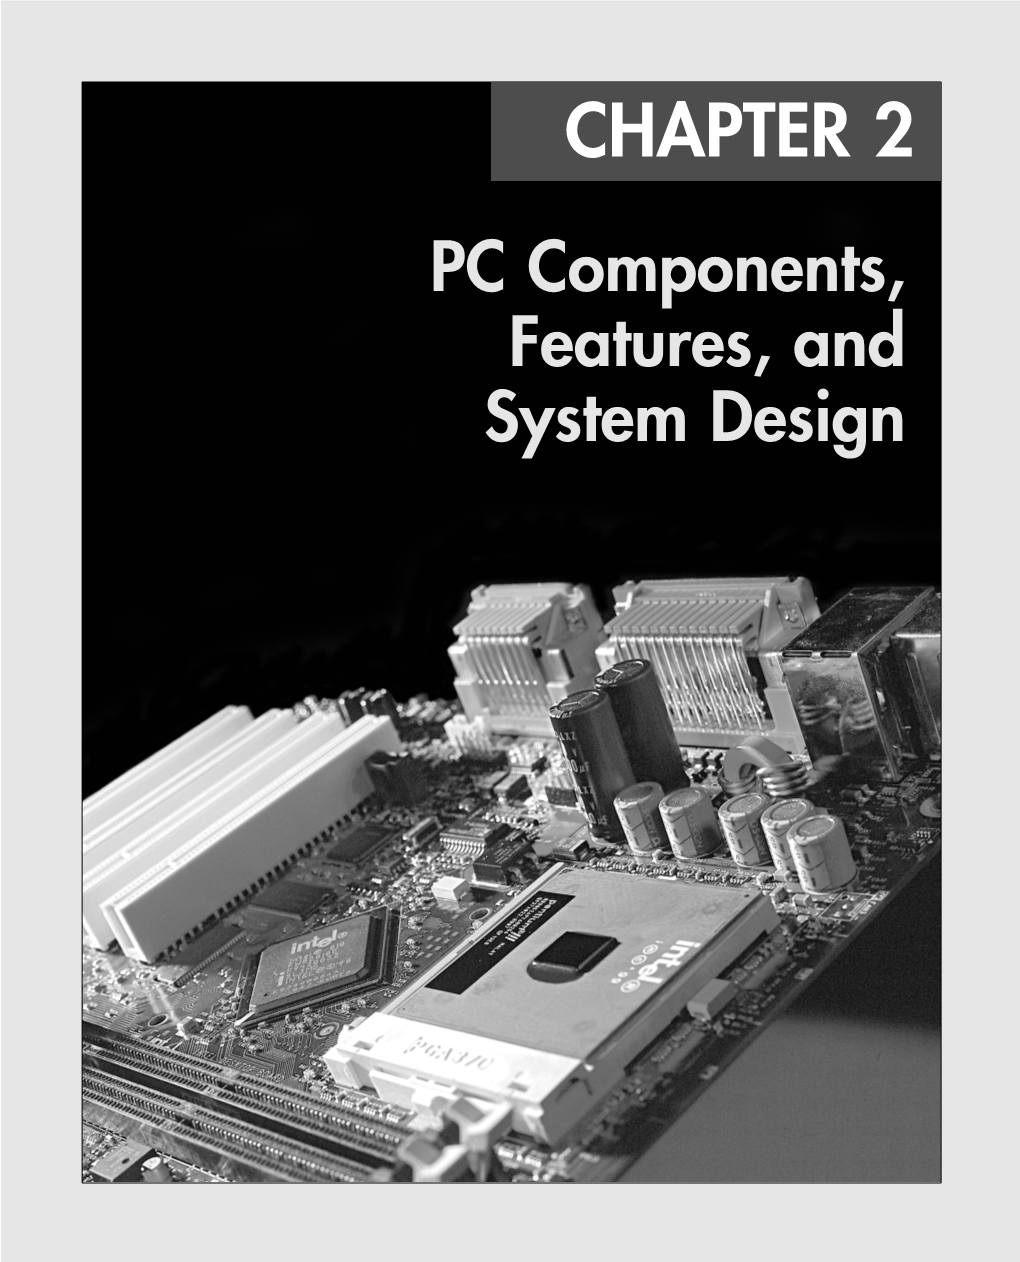 CHAPTER 2 PC Components, Features, and System Design 03 1738 Ch02 7/30/04 10:35 AM Page 26